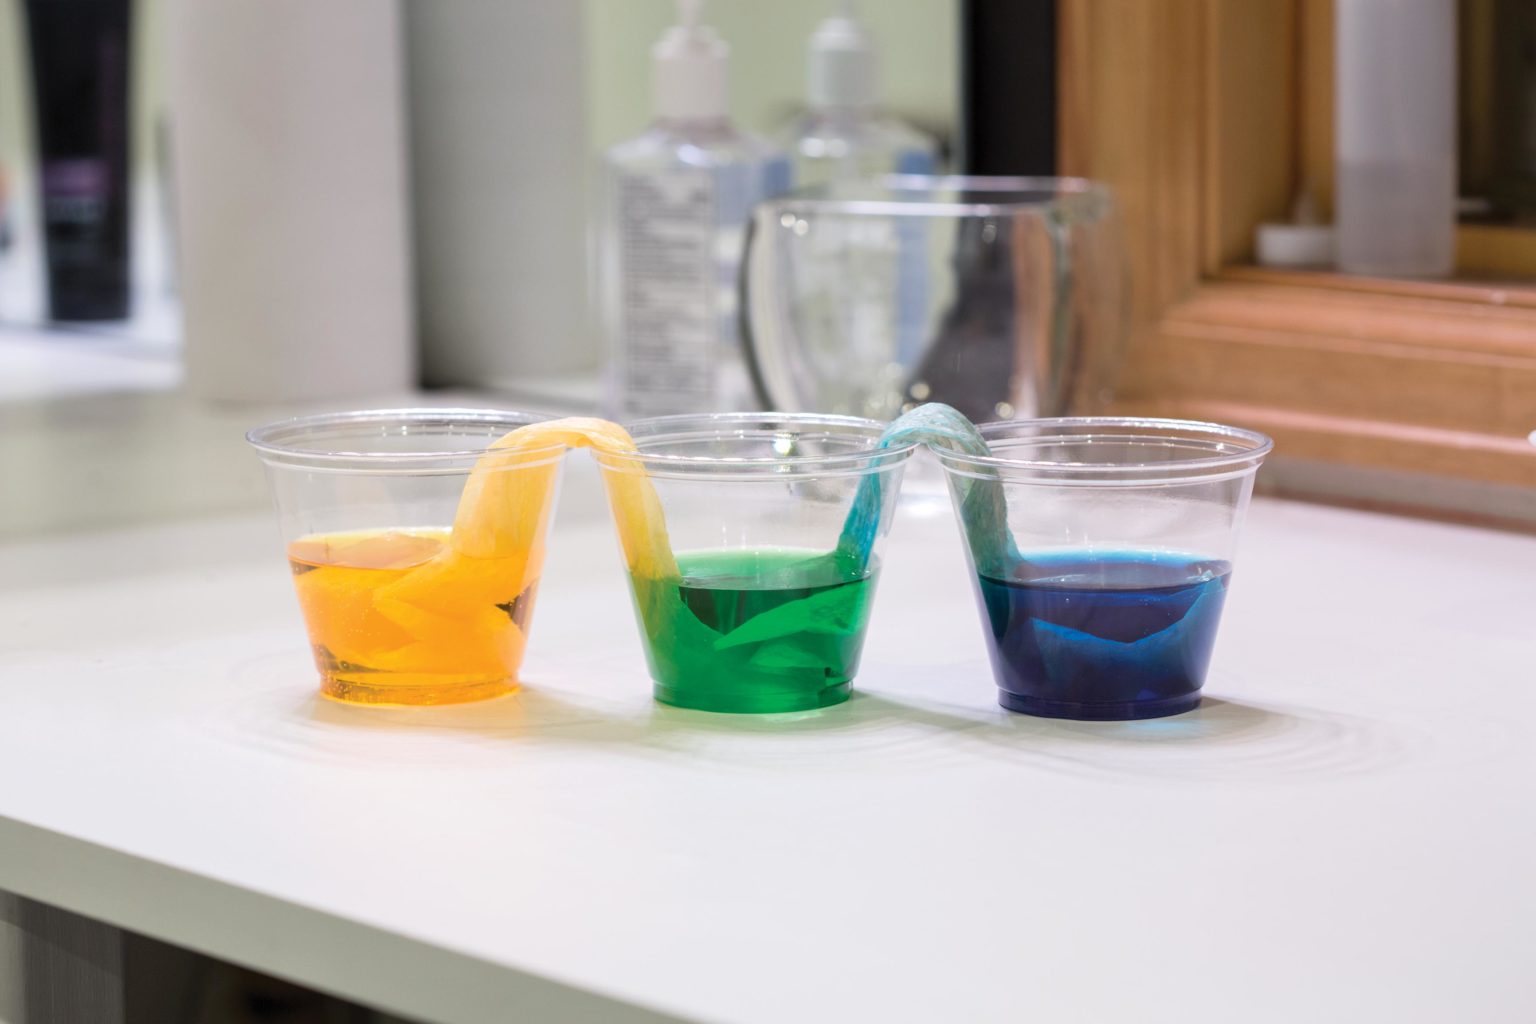 Three plastic cups with paper towels linking them. One cup is yellow and one is blue. The cup that joins the two is green.